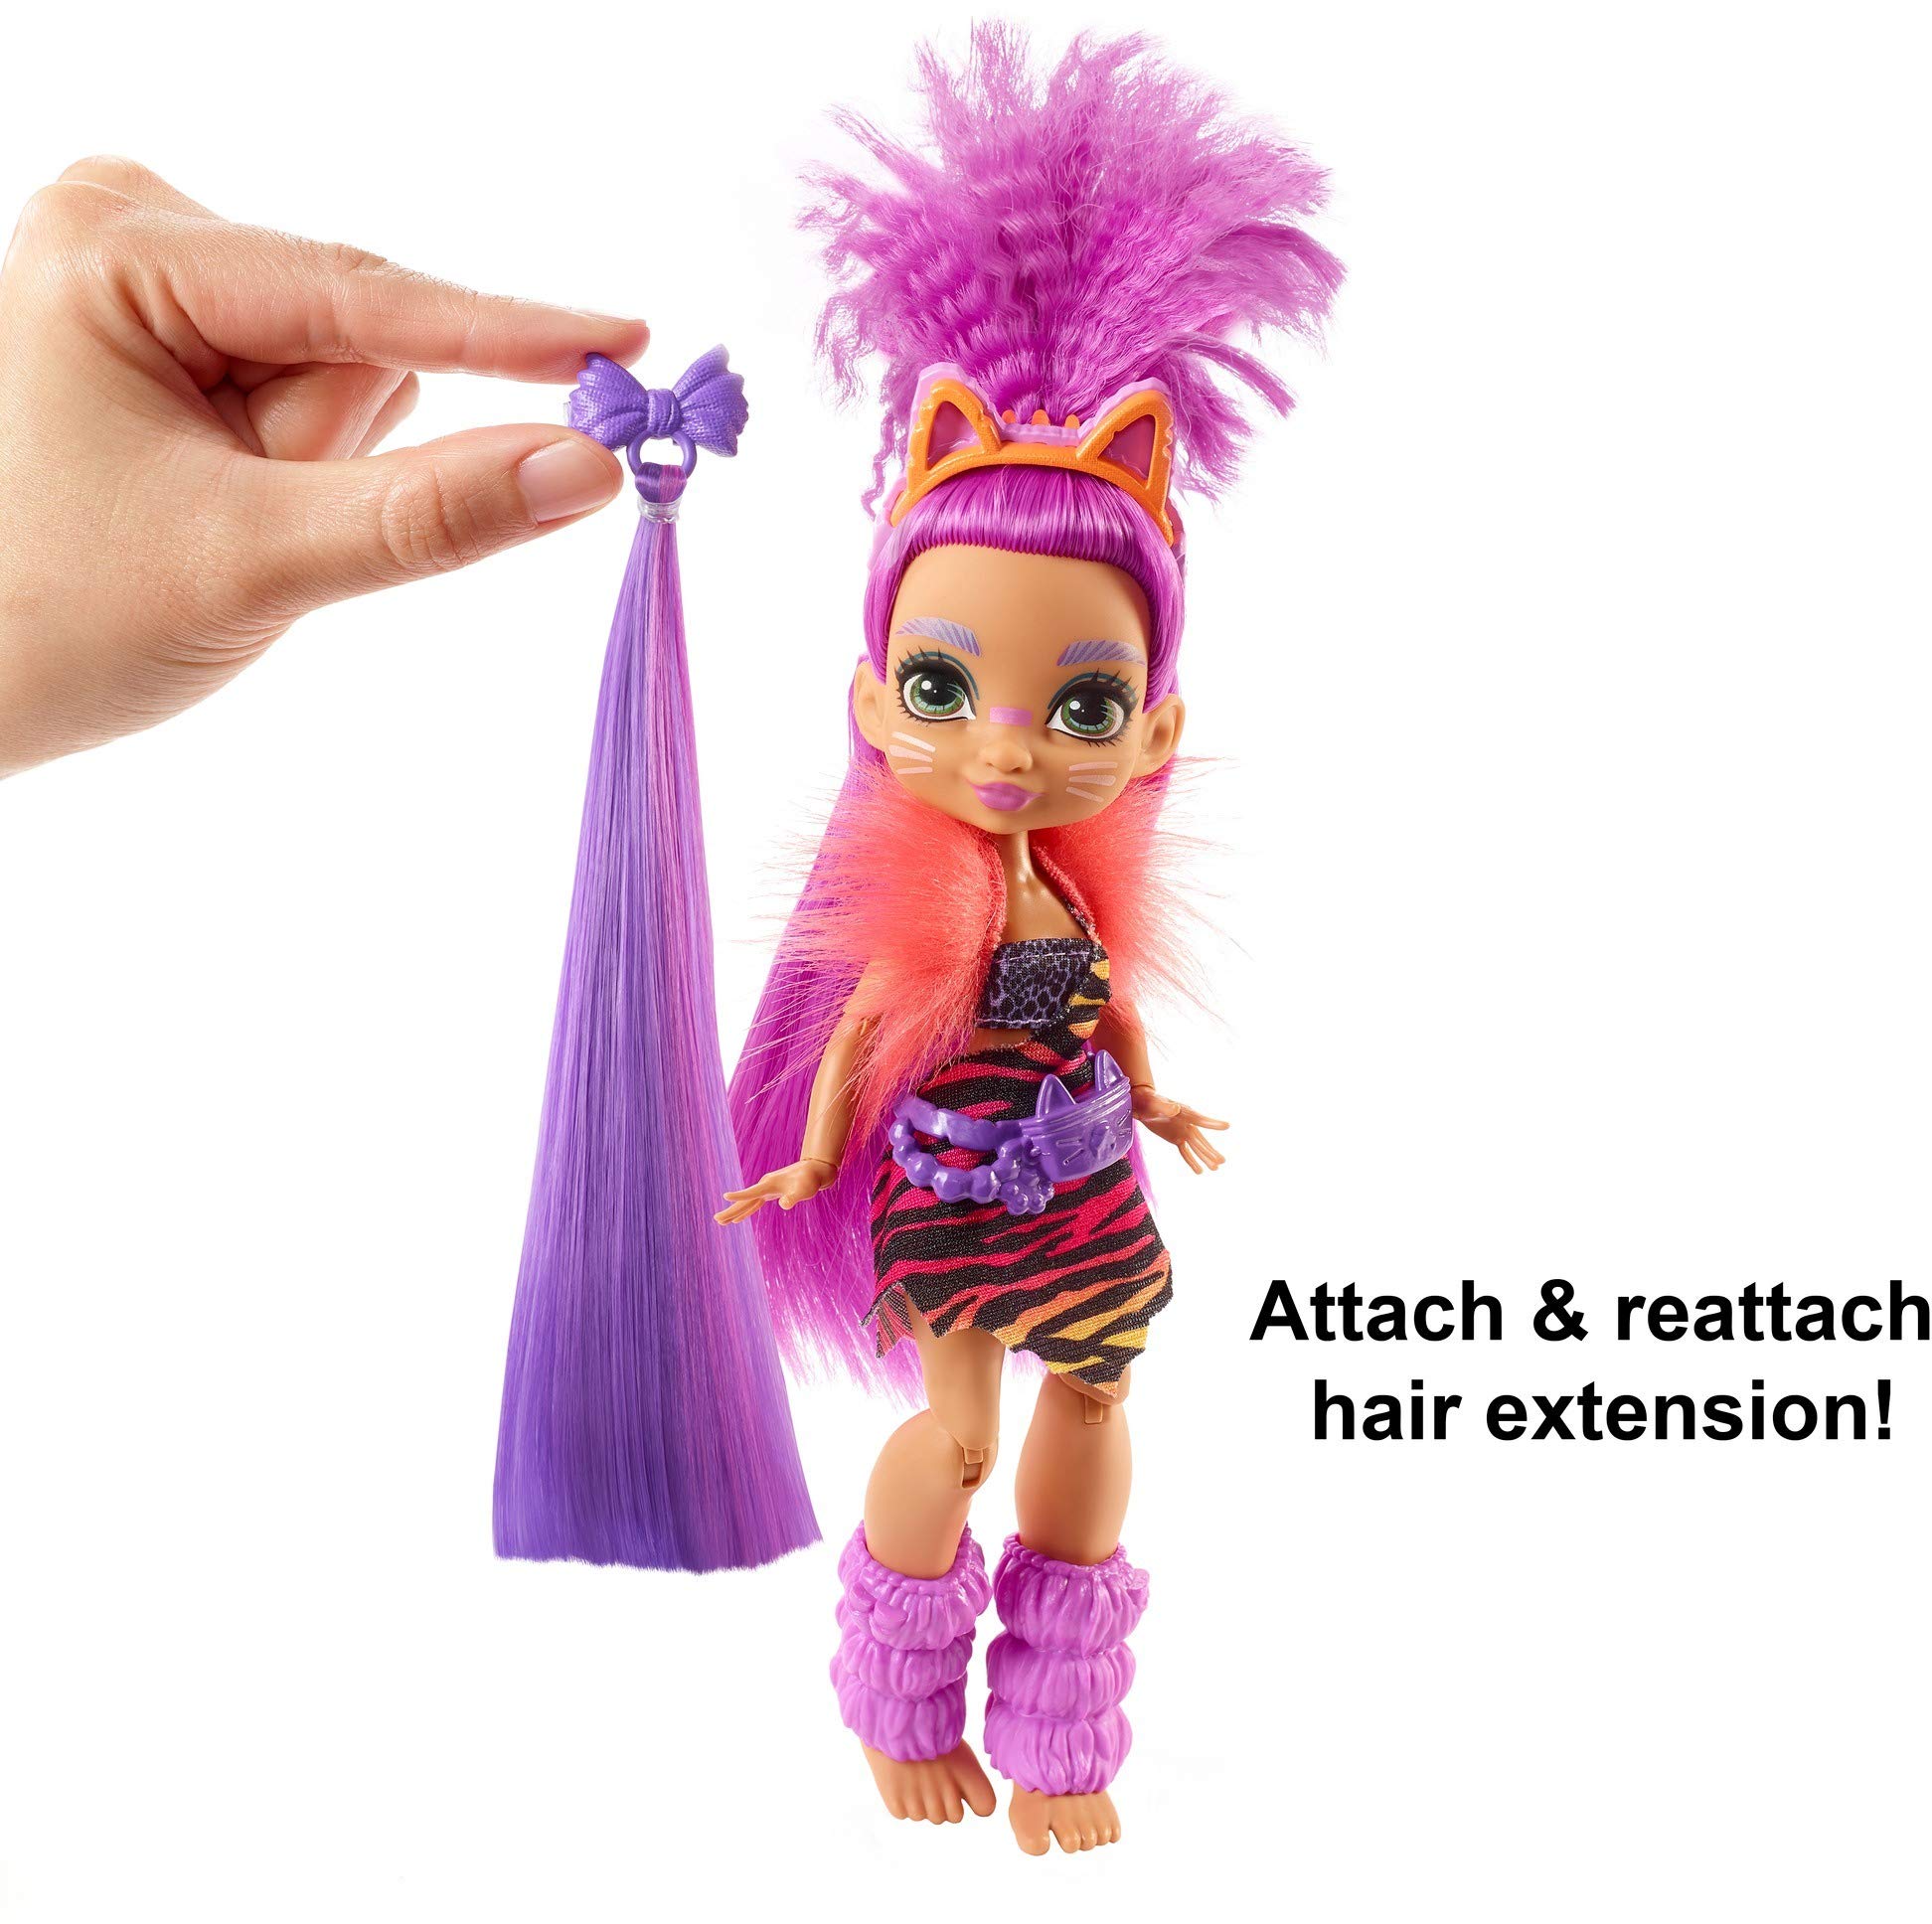 Cave Club Roaralai Doll (8 – 10-inch, Purple Hair) Poseable Prehistoric Fashion Doll with Dinosaur Pet and Accessories, Gift for 4 Year Olds and Up [Amazon Exclusive]